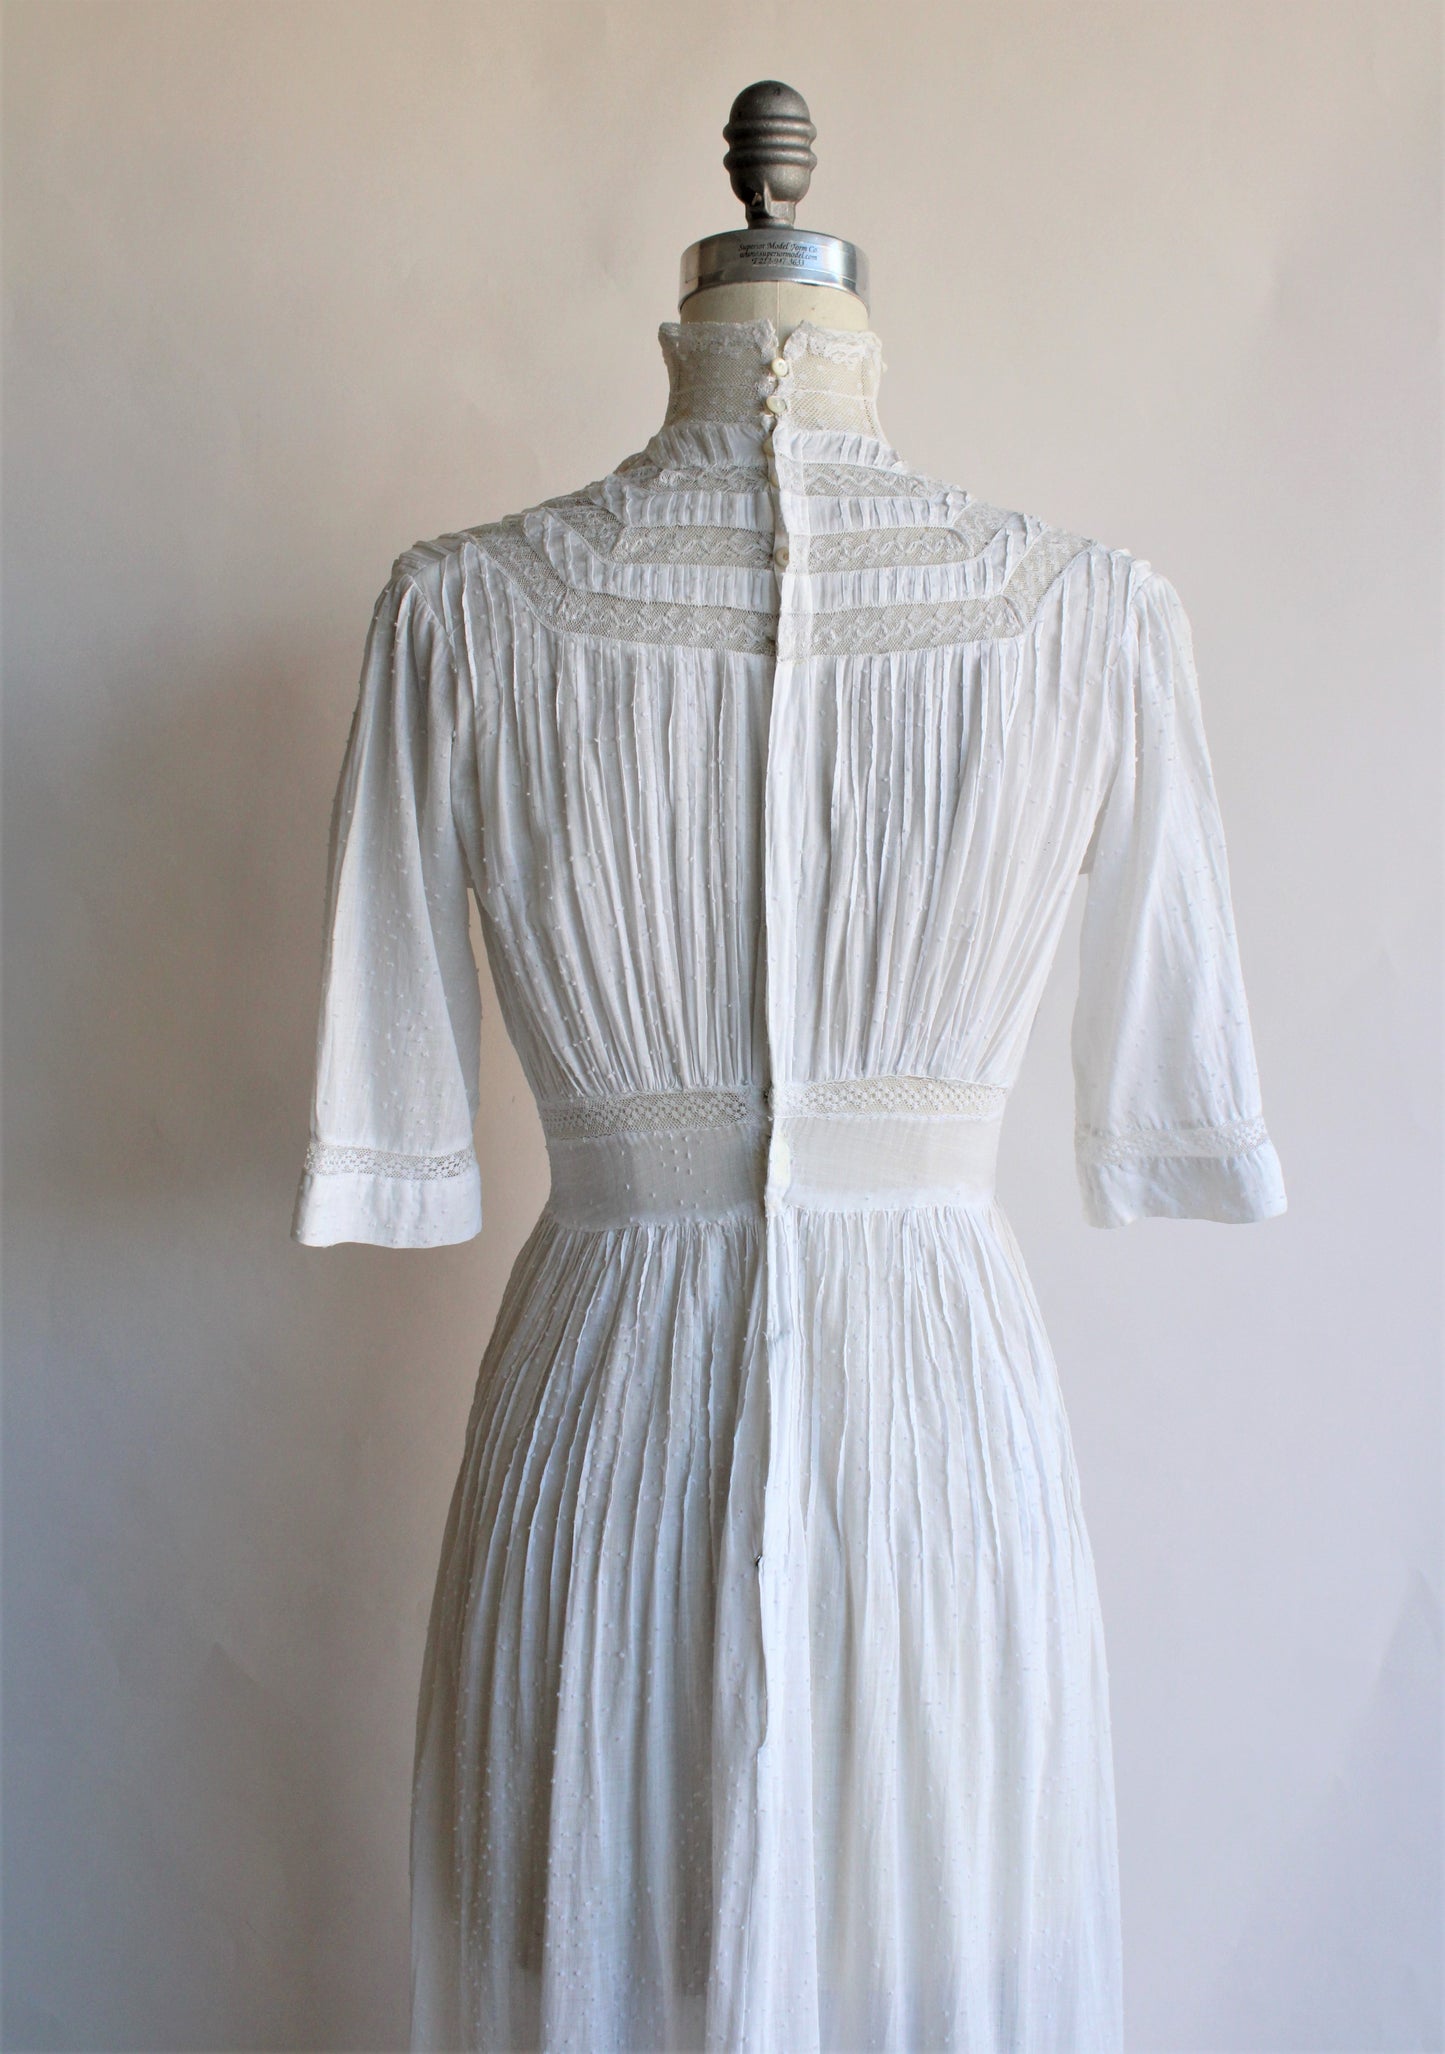 Antique Edwardian White Dress In Cotton and Lace